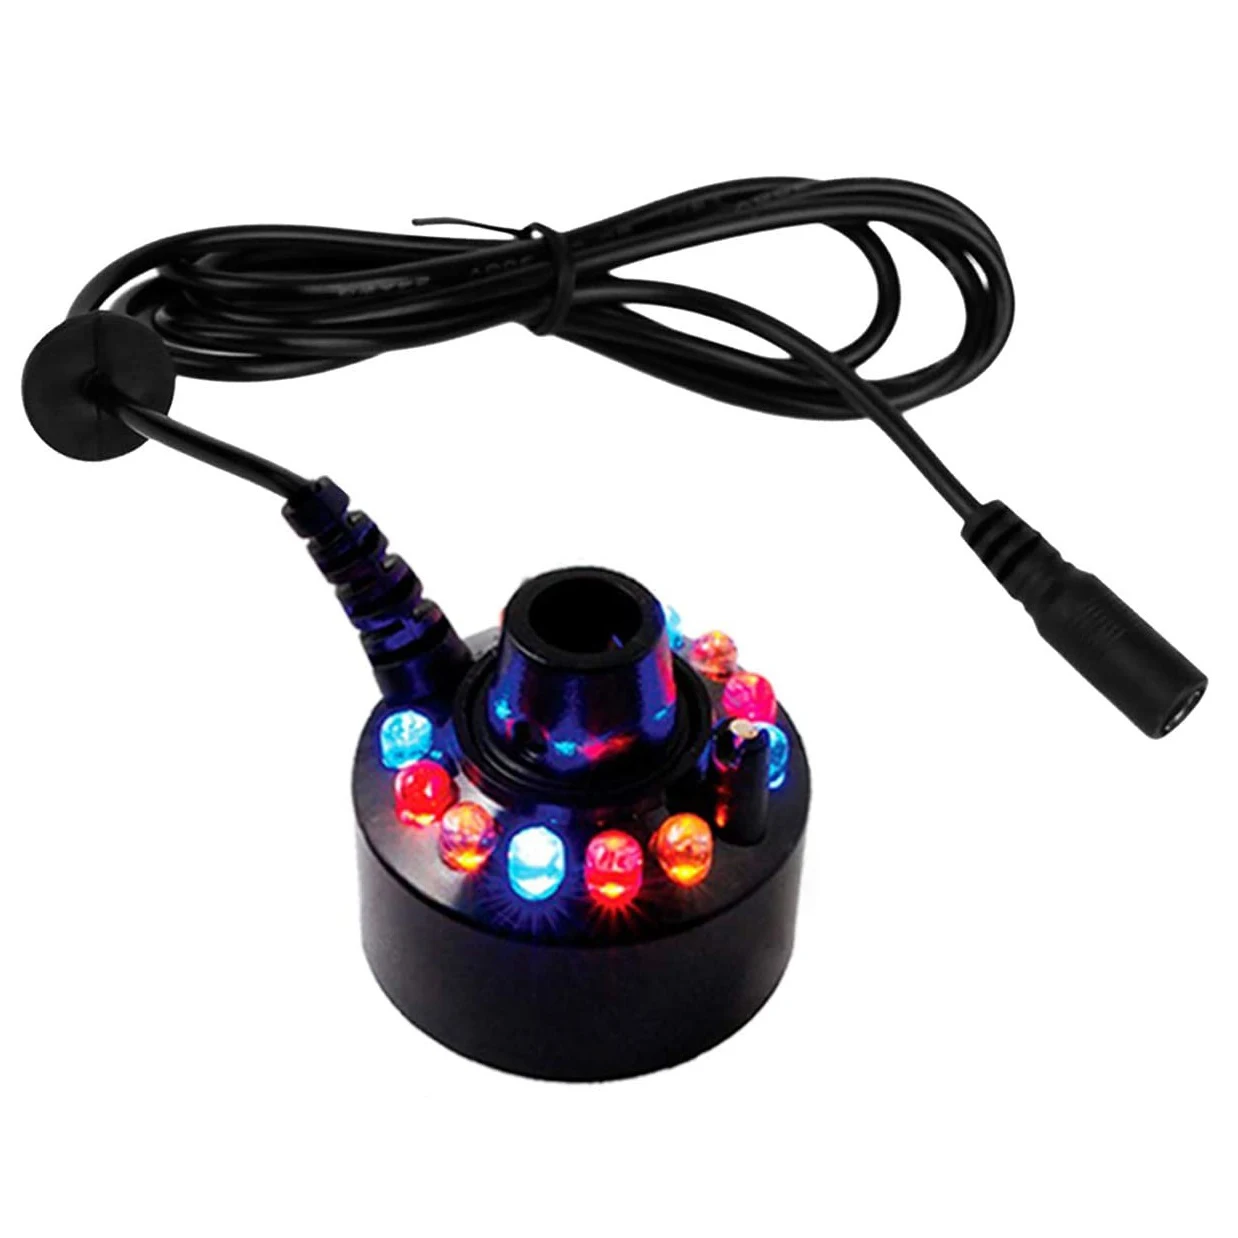 

Mist Maker, Indoor Fountain Mister Foggers, Small Pond Fog Machine Atomizer Air Humidifier for Halloween, Christmas